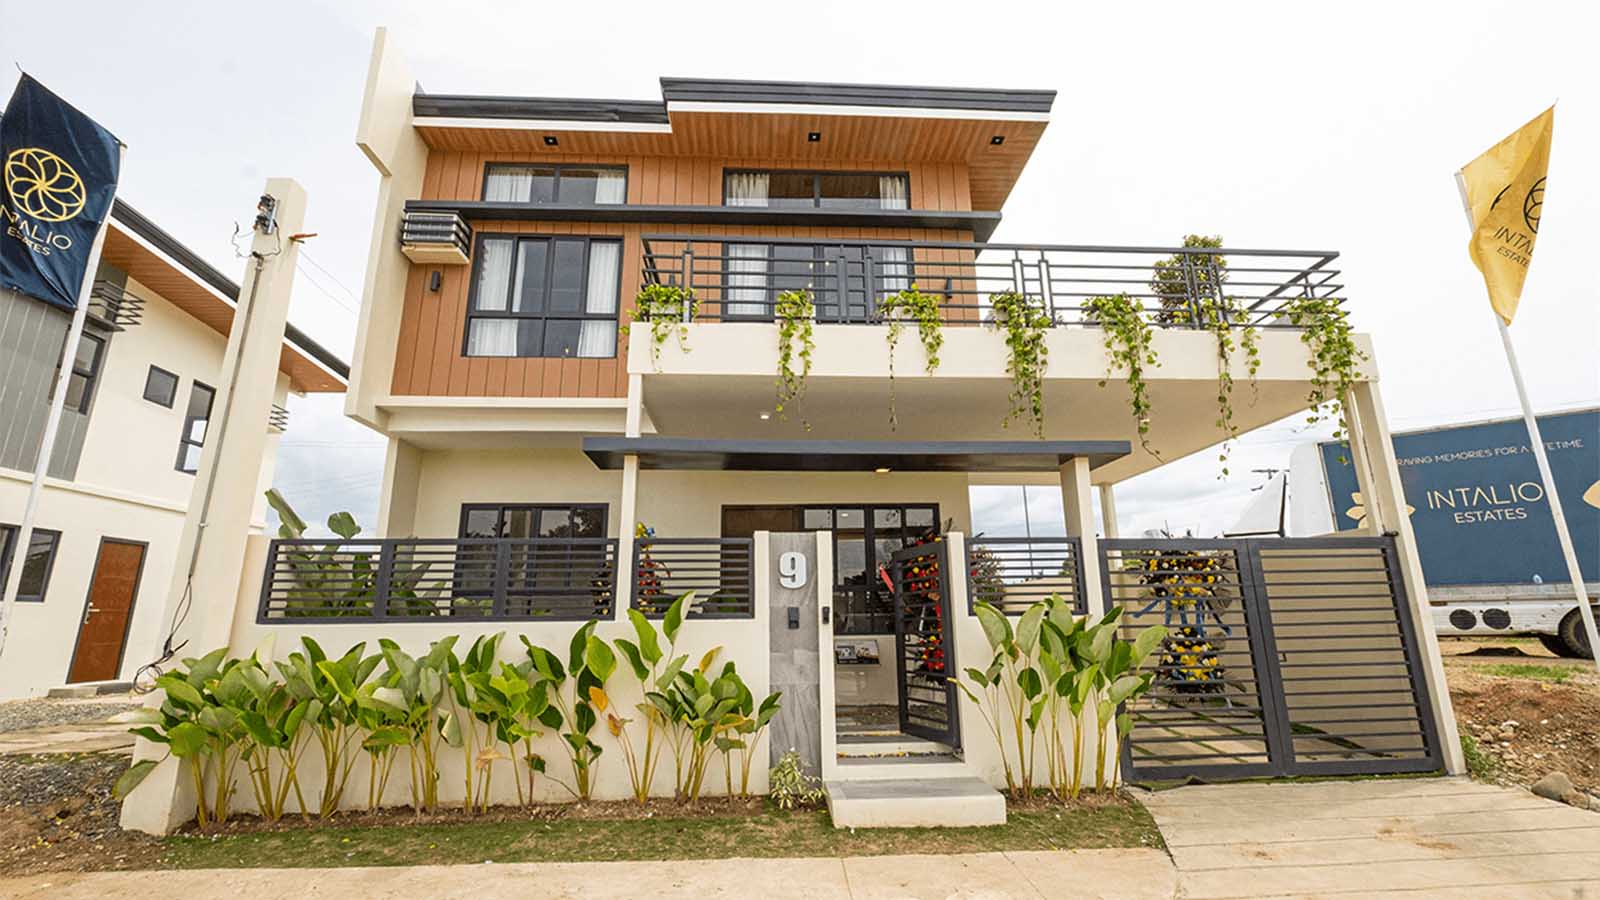 4 Bedrooms 2 Storey House and Canitoan, CDO - Intalio Estates